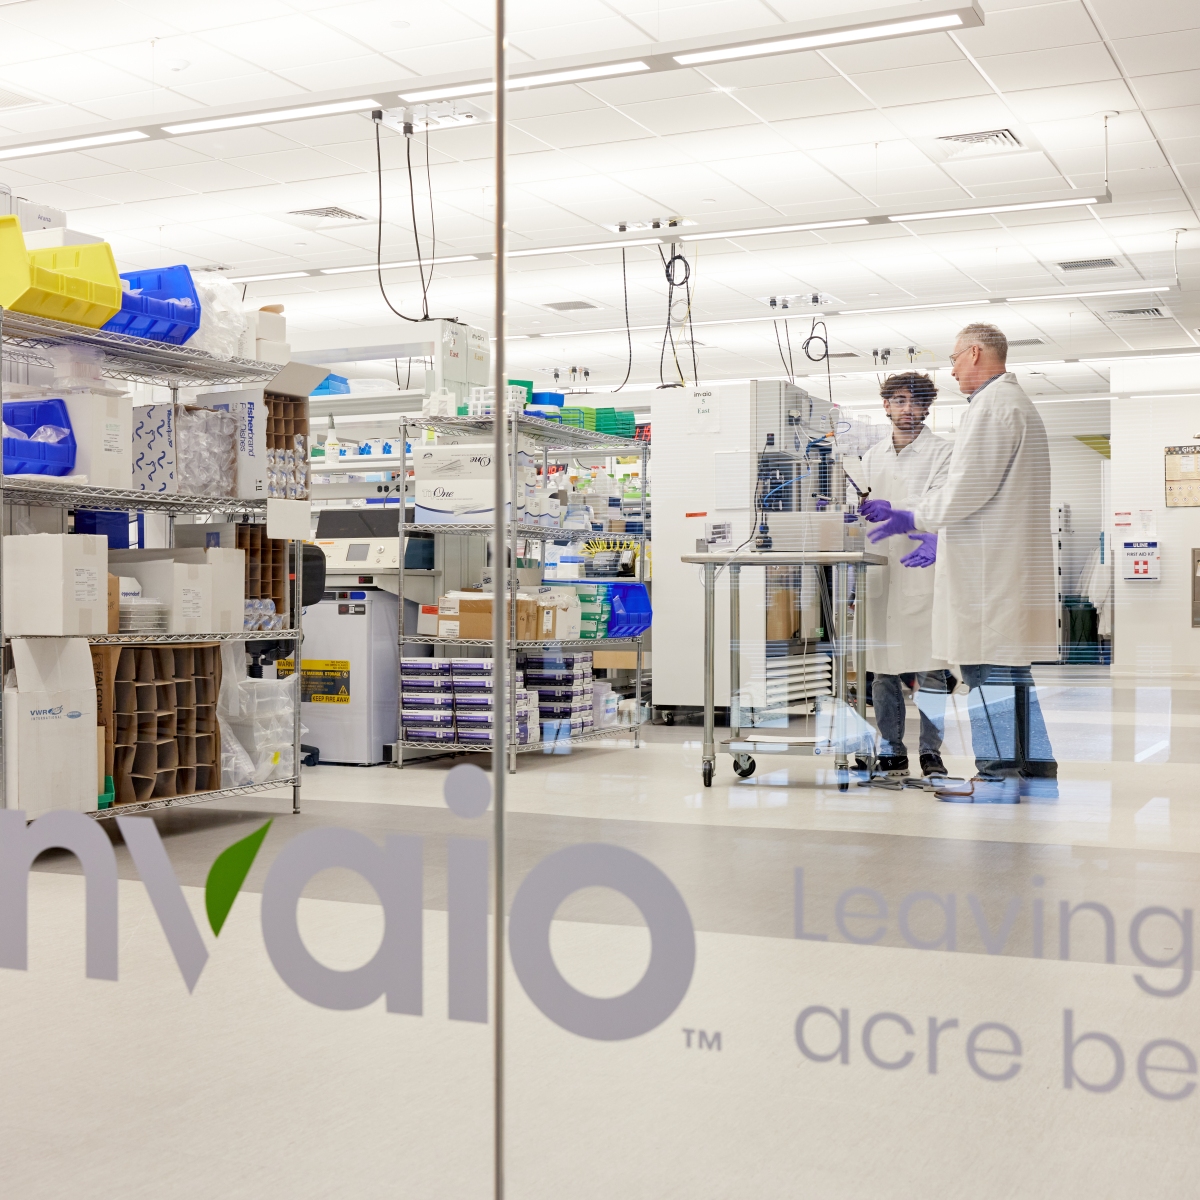 Invaio Sciences acquires Peptyde Bio to accelerate nature-positive crop protection pipeline